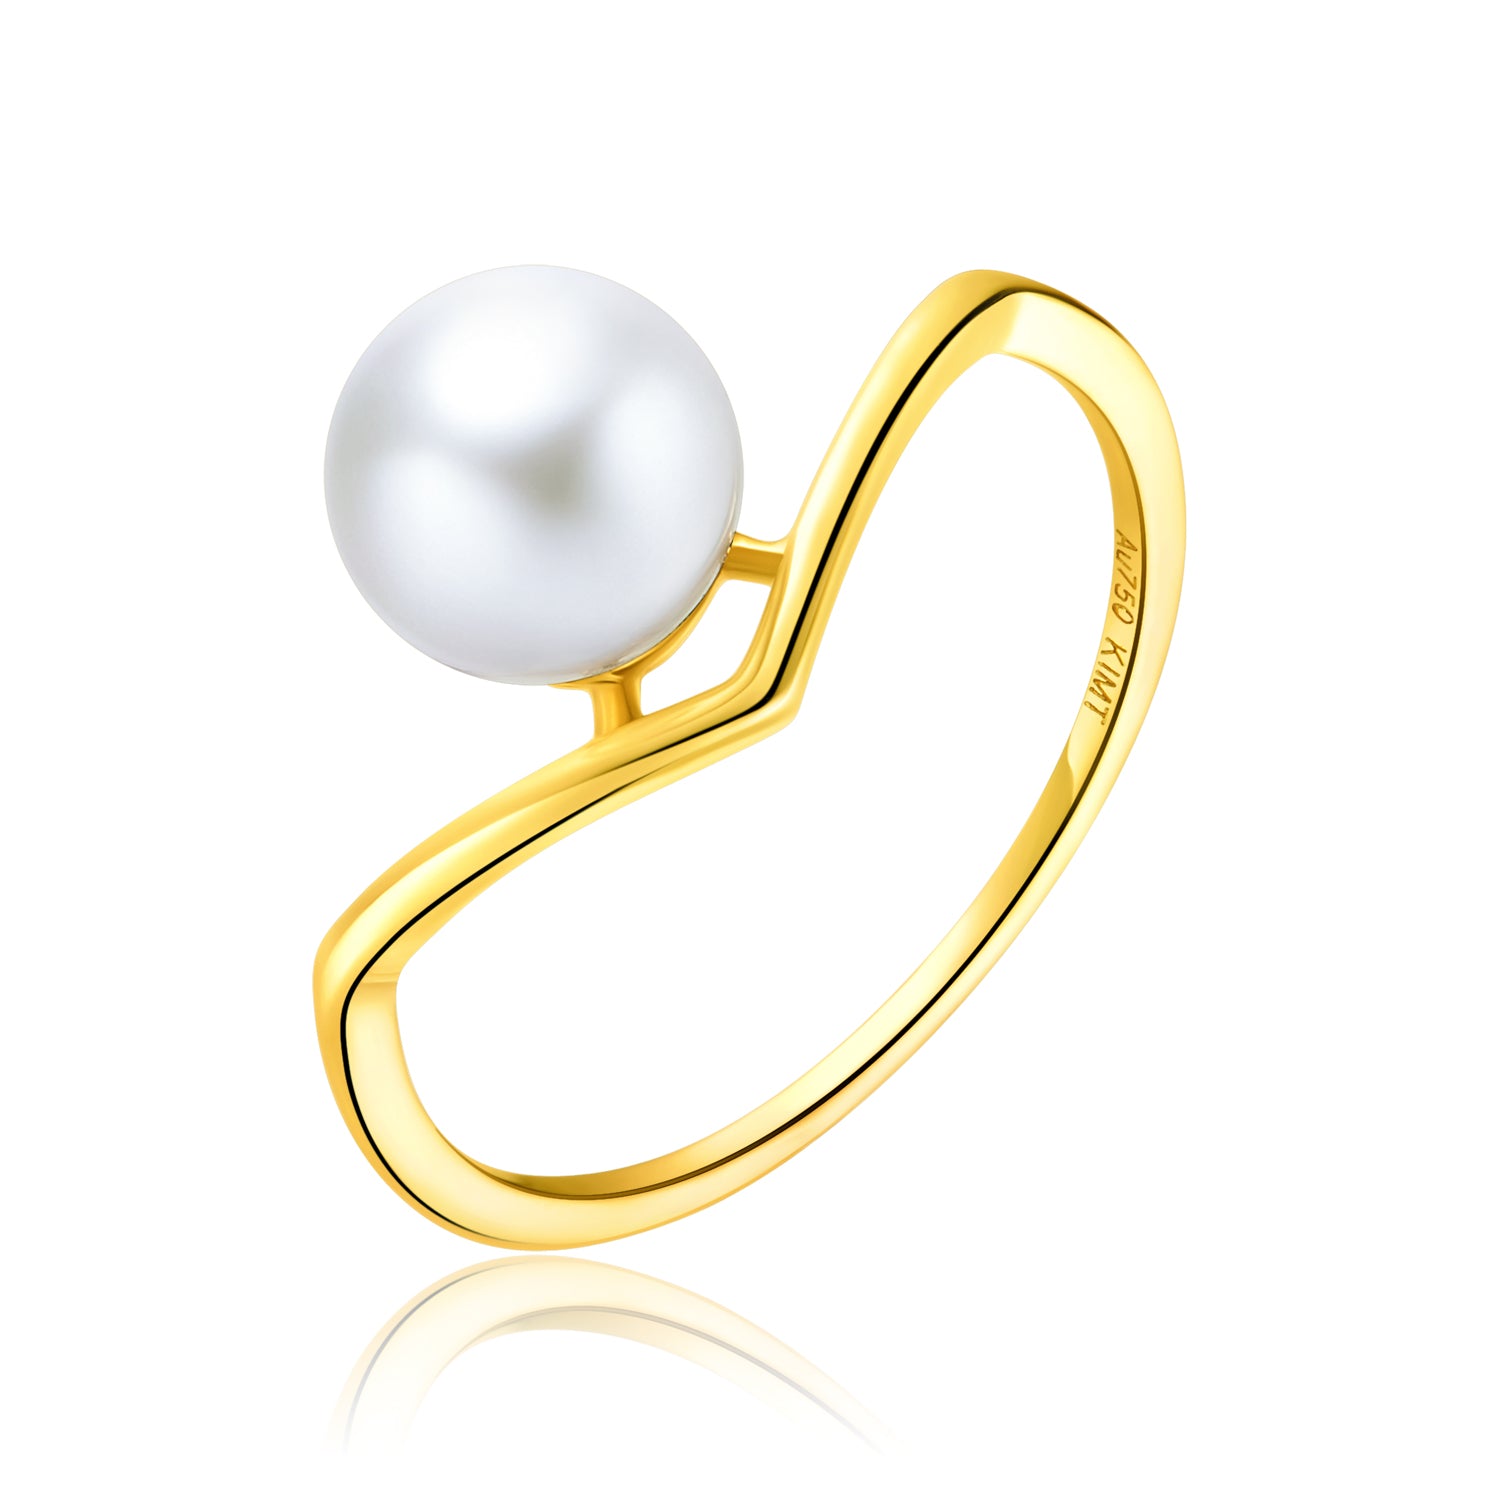 18KY Gold Akoya Pearl Ring - Woment Designer Jewelry